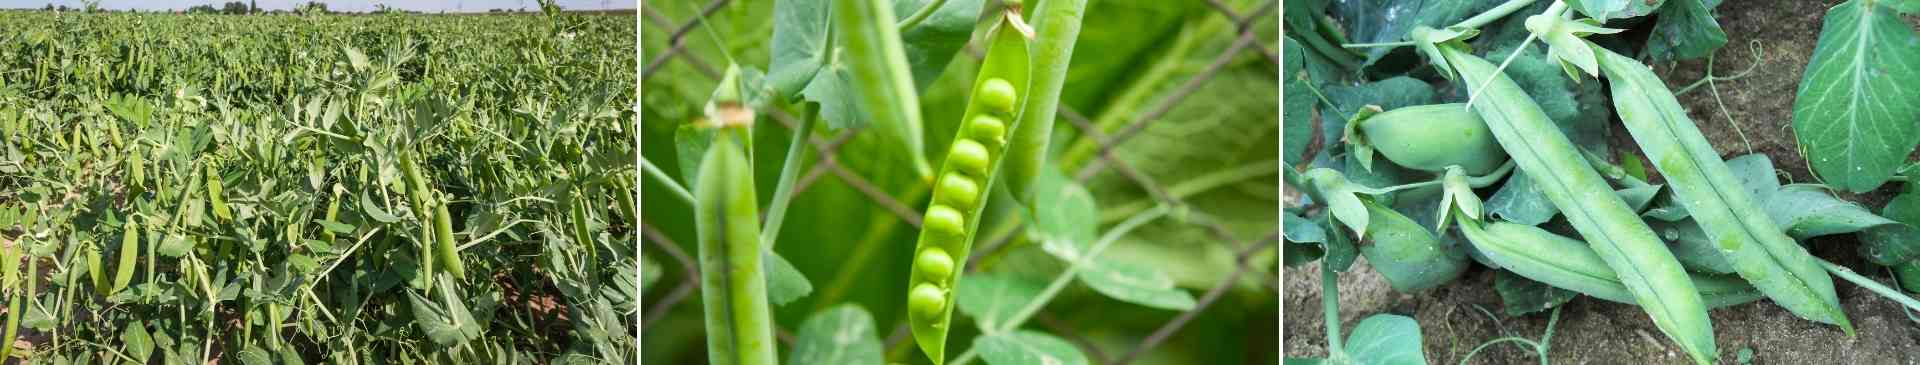 Peas: The Sweetest Veggie of All?